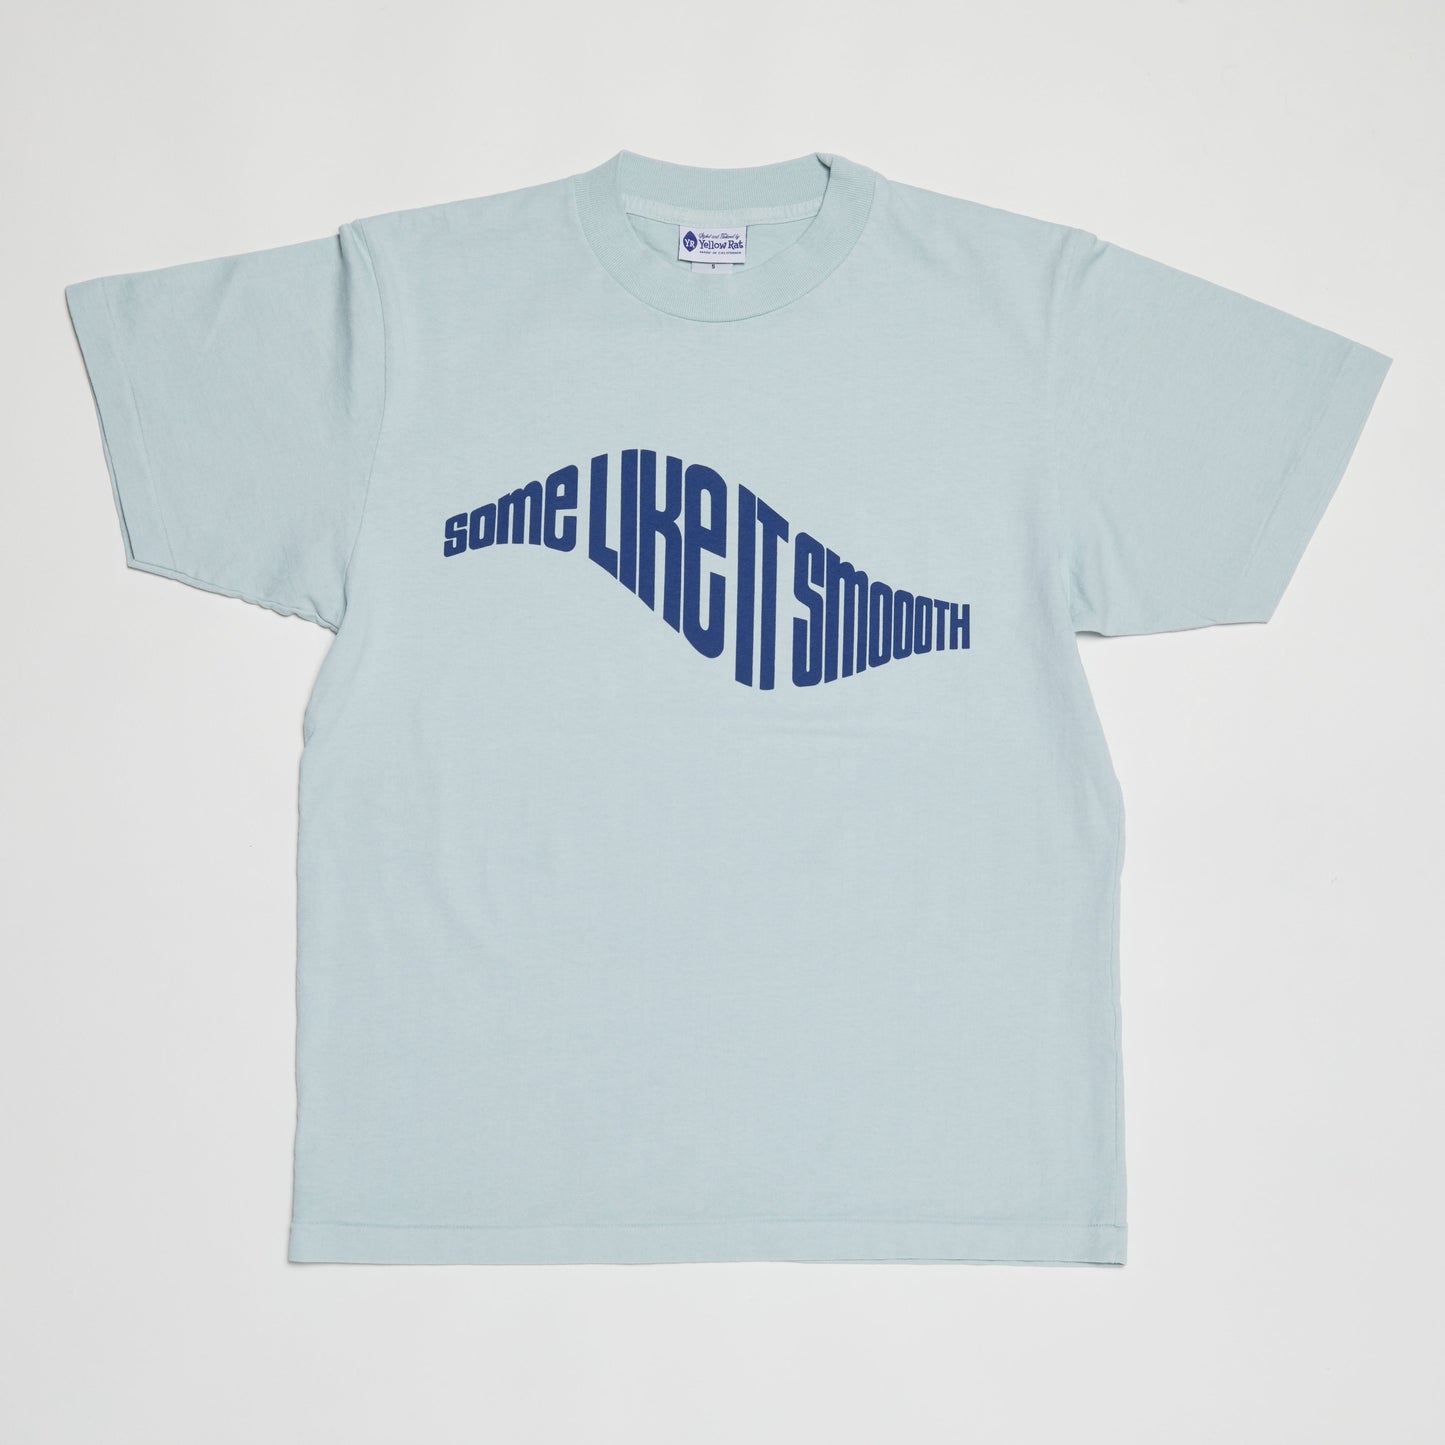 Some Like It Smooth T-Shirt I (Dusty Blue)